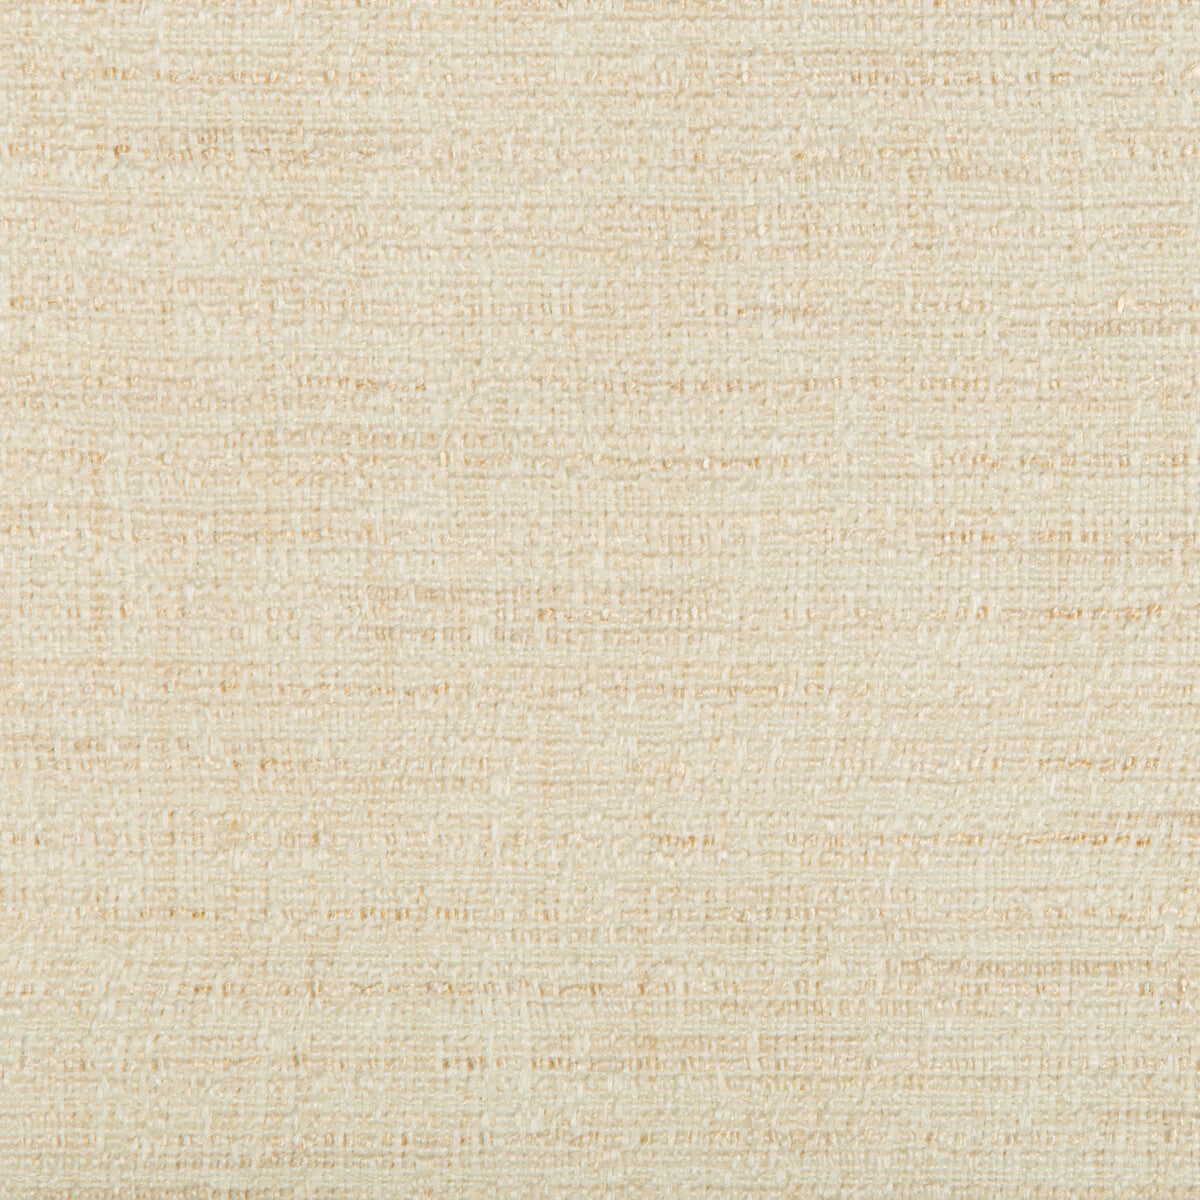 Kravet Contract fabric in 35410-116 color - pattern 35410.116.0 - by Kravet Contract in the Crypton Incase collection